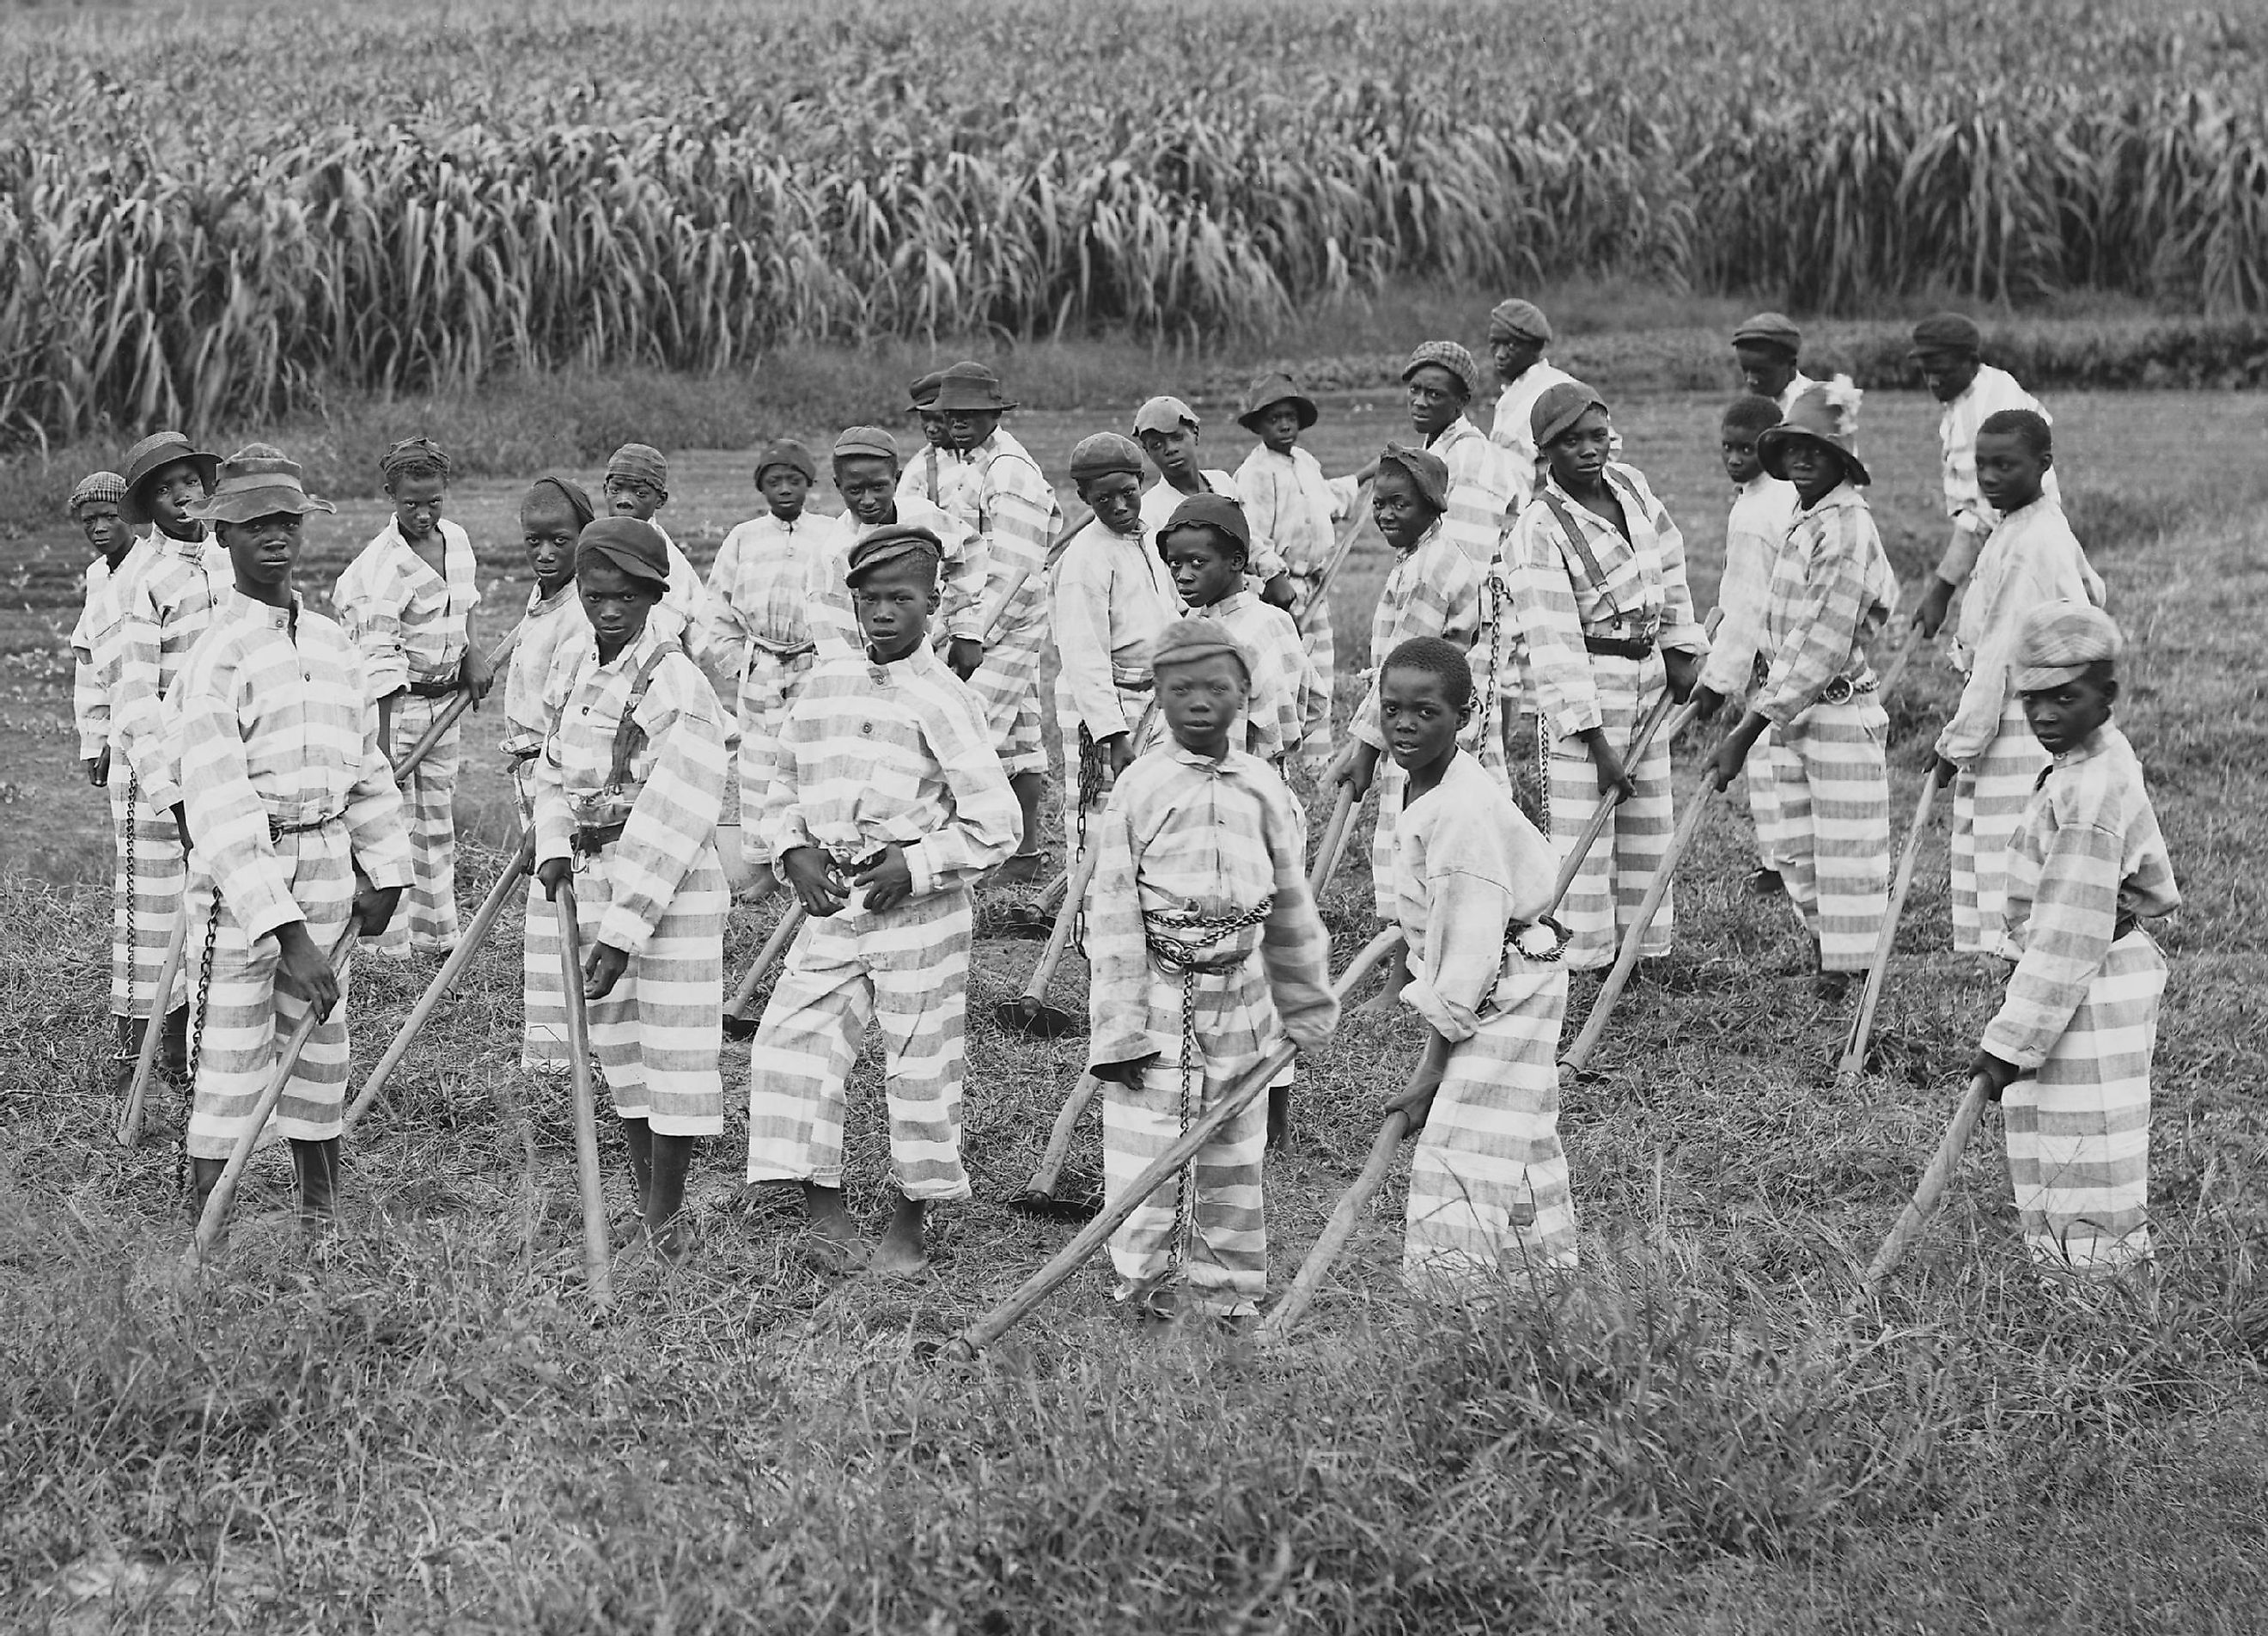 Juvenile convicts at work in the fields in the Jim Crow South in 1903.